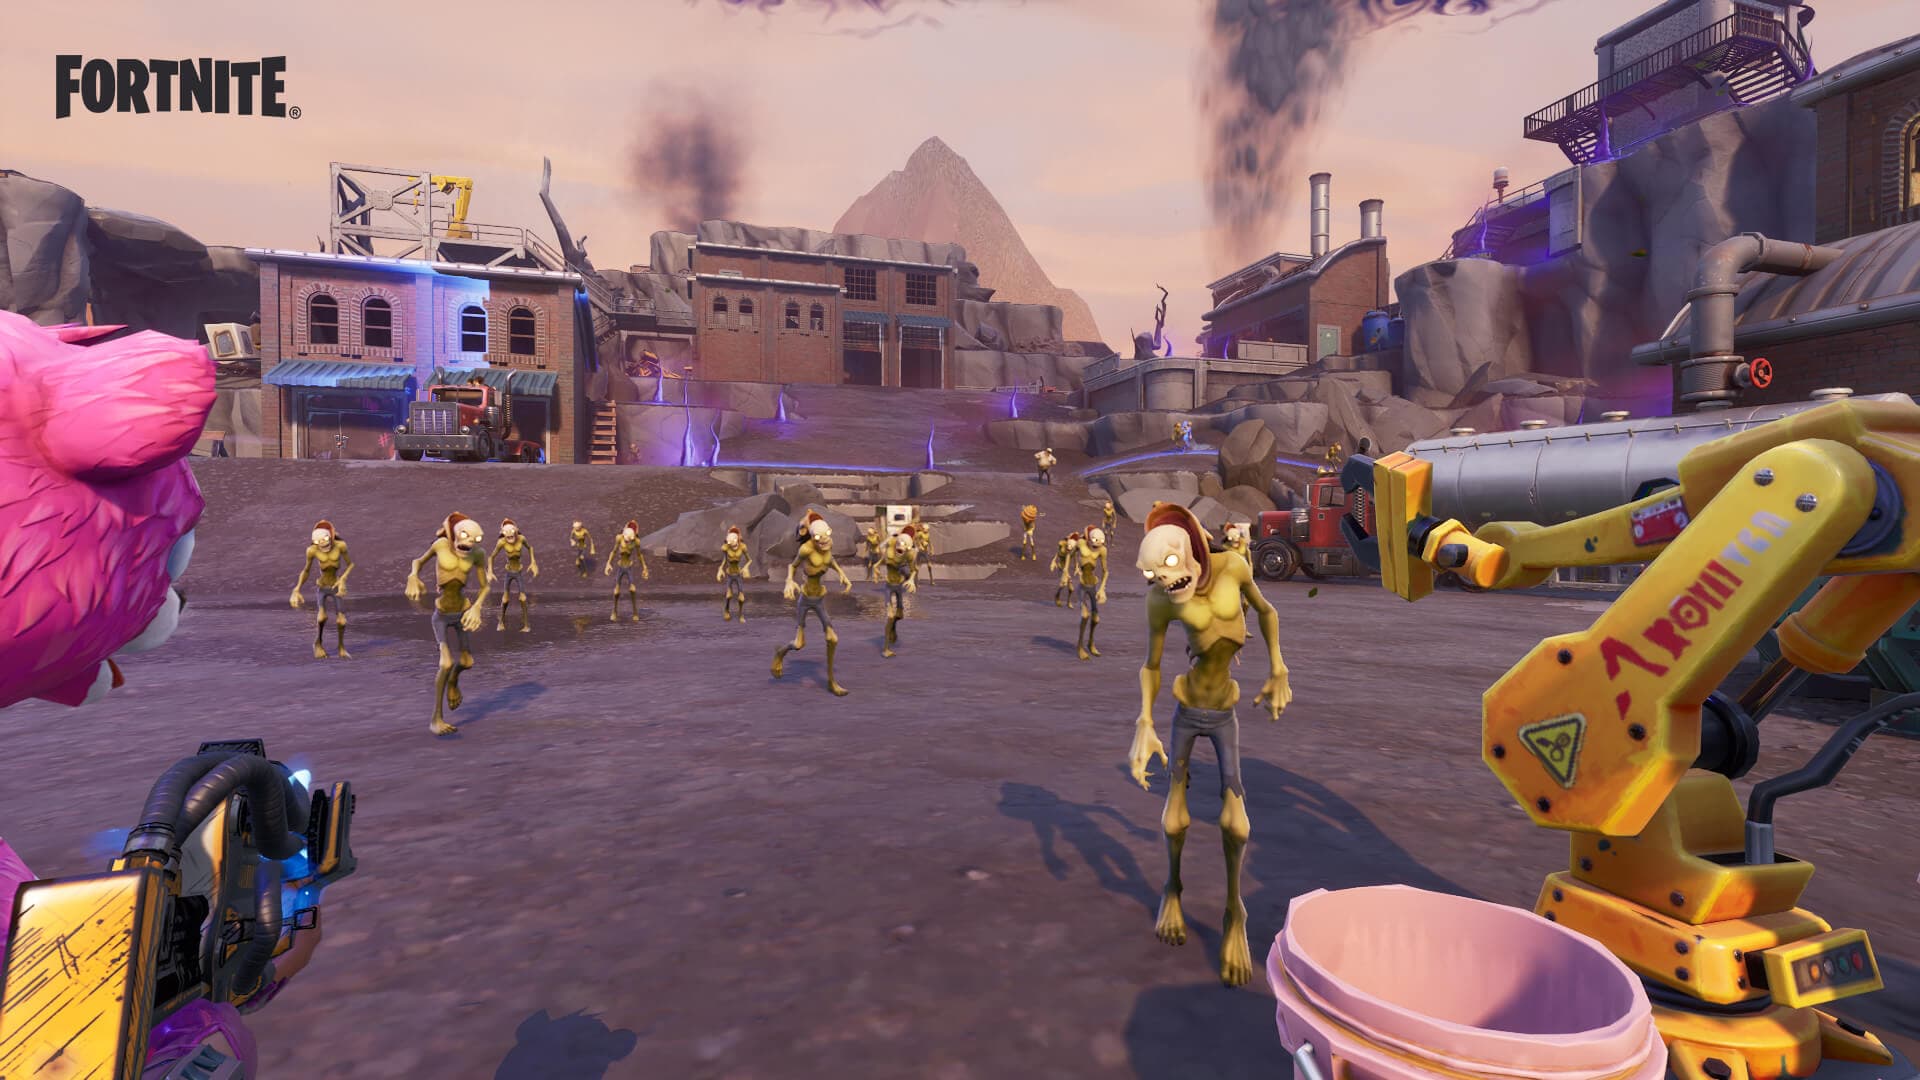 A player wearing a pink bear head stands off against a horde of zombies in Fortnite's Save the World mode.